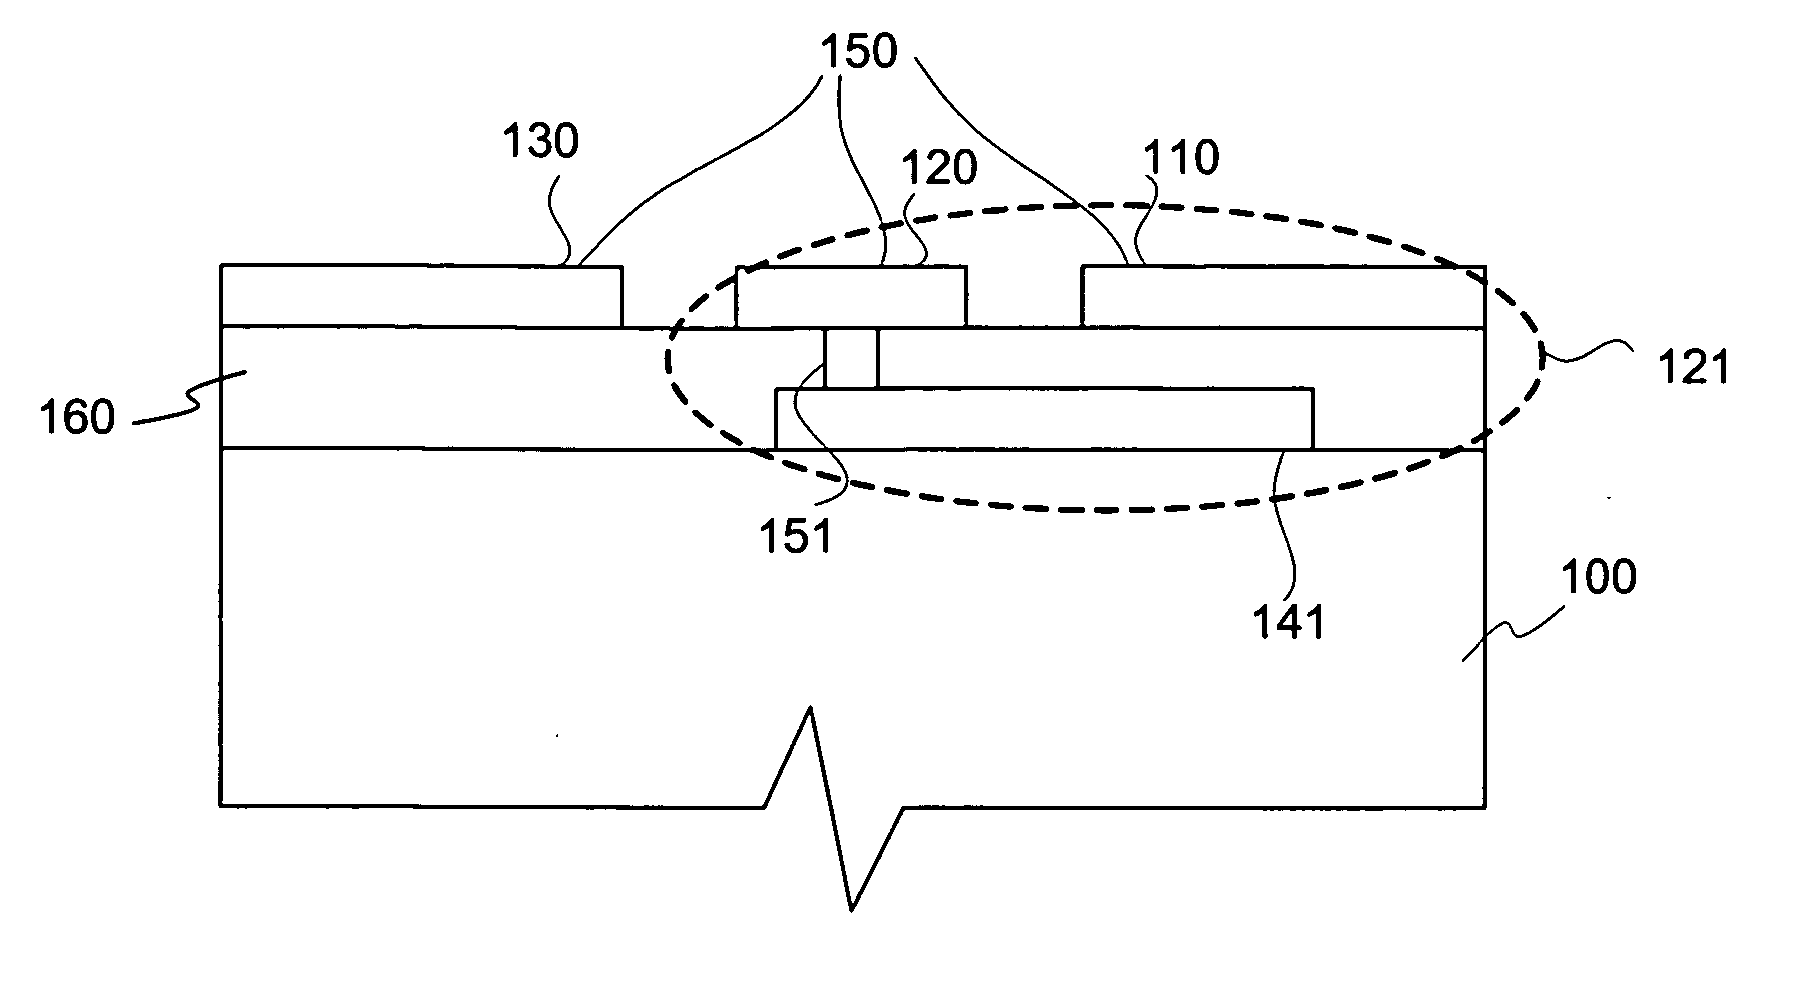 Reduced size transmission line using capacitive loading